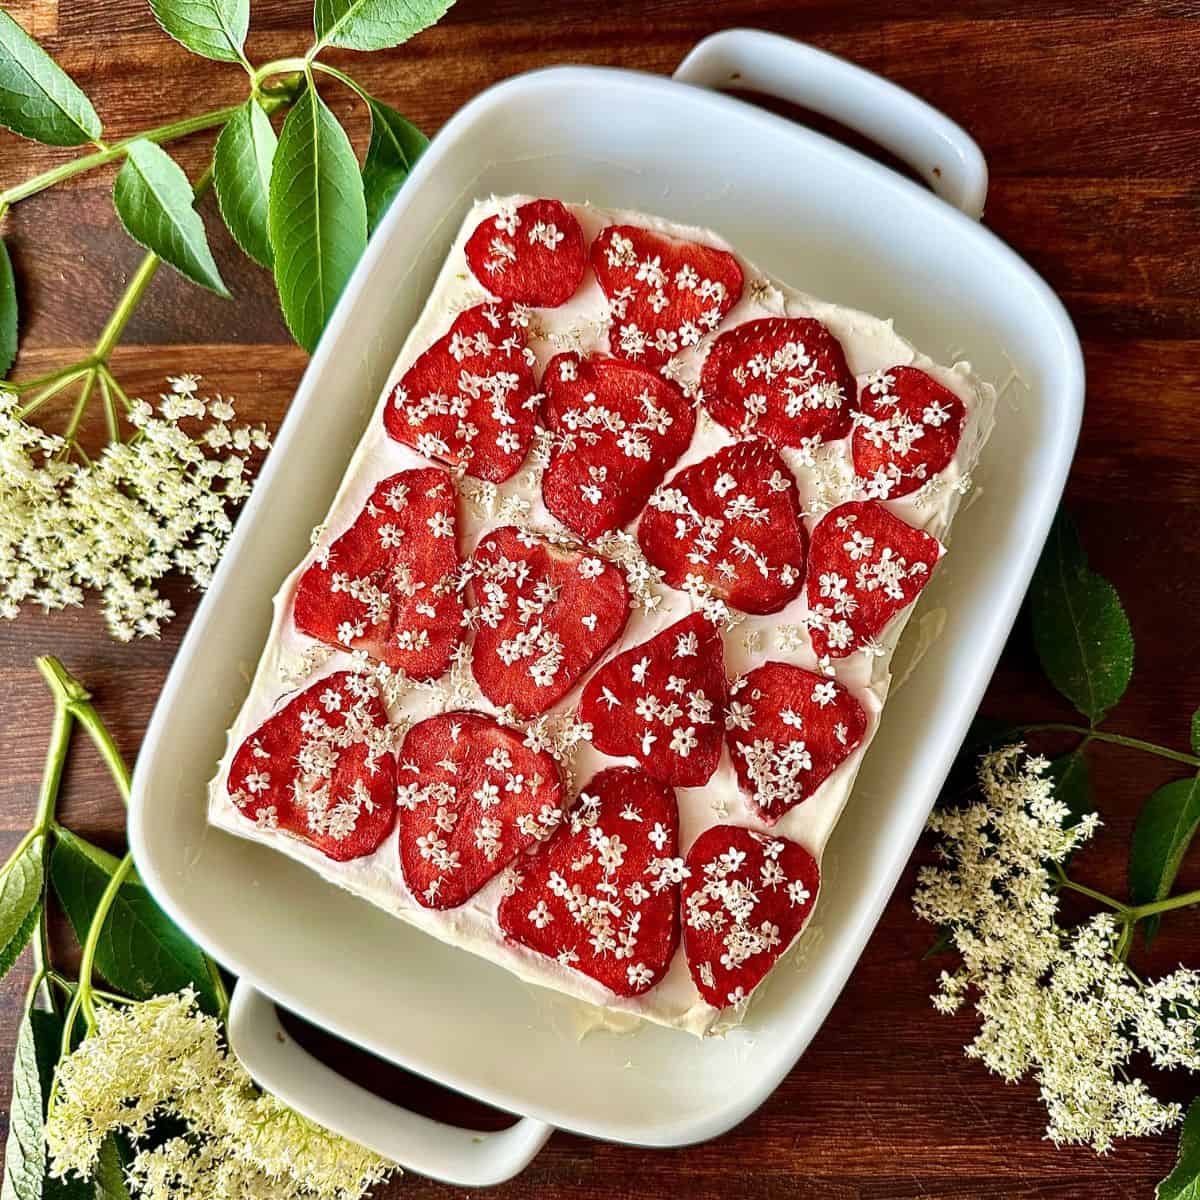 A deep, white dish containing a layered elderflower and strawberry cake. The dish is surrounded by elderflower heads for decoration.